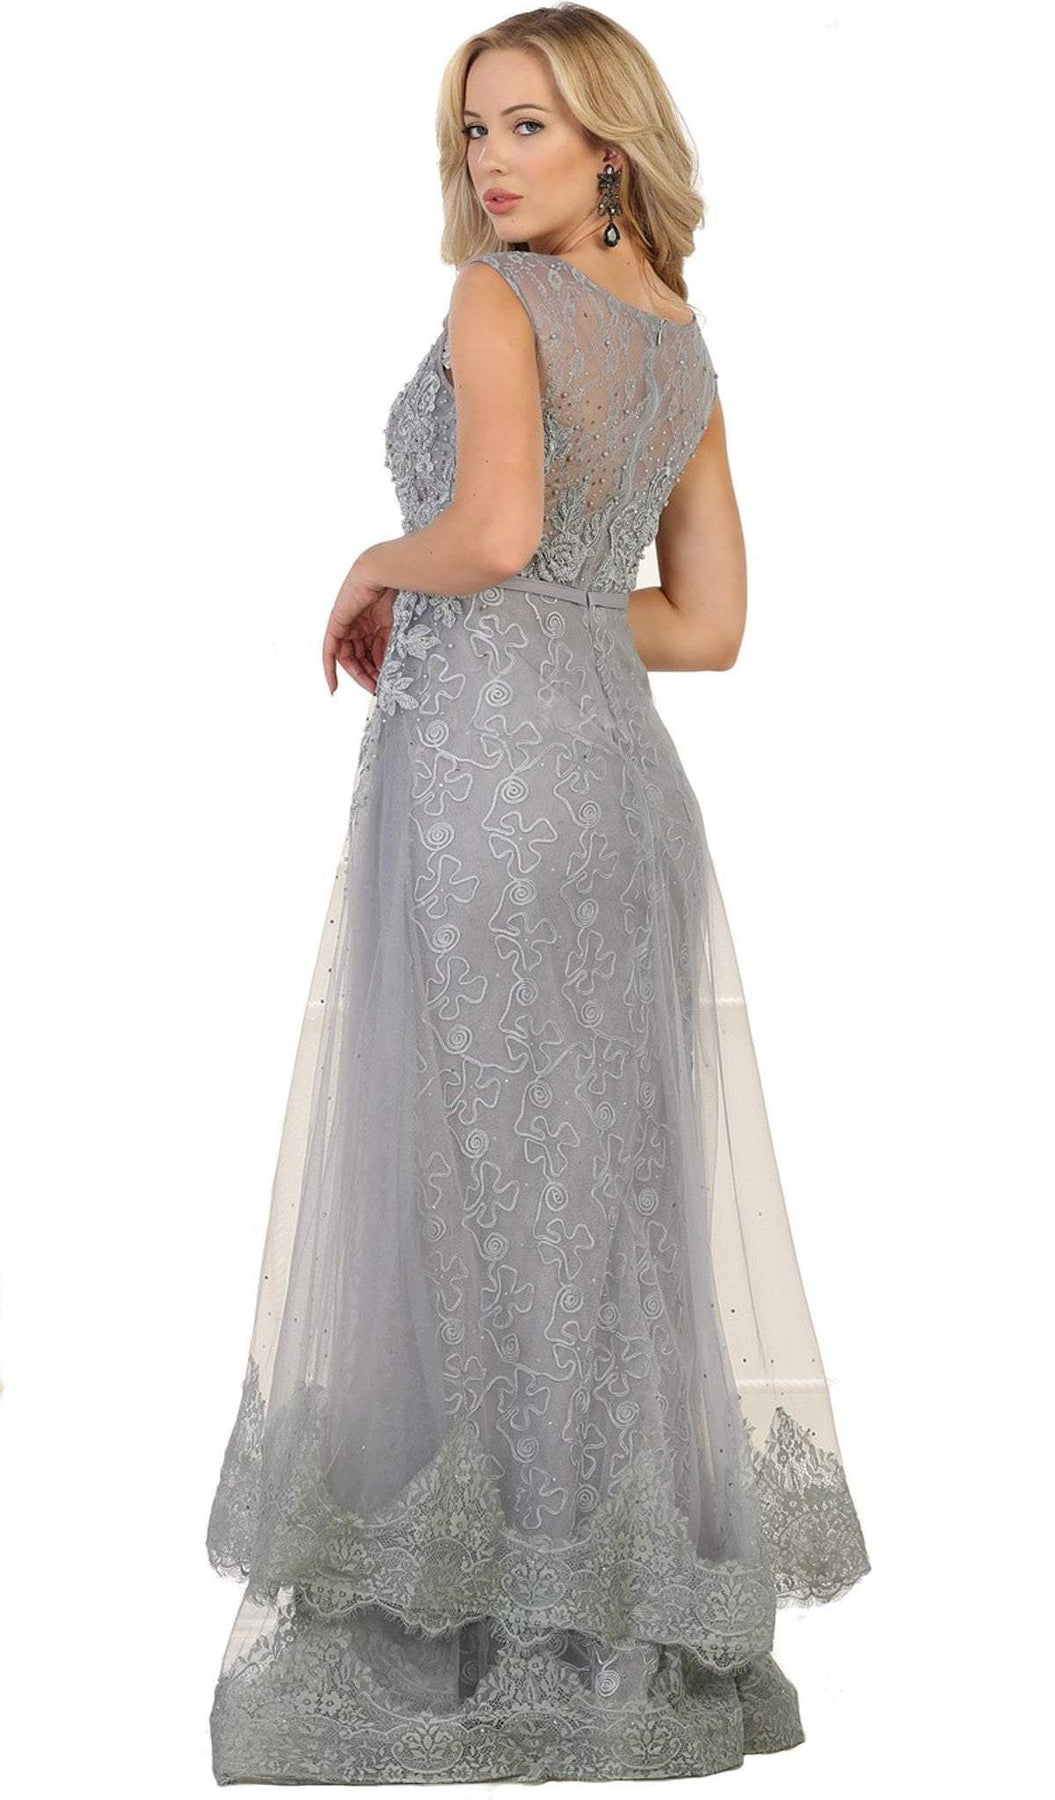 May Queen - RQ7568 Beaded Lace Illusion Bateau Sheath Mother of the Bride Dress Mother of the Bride Dresses